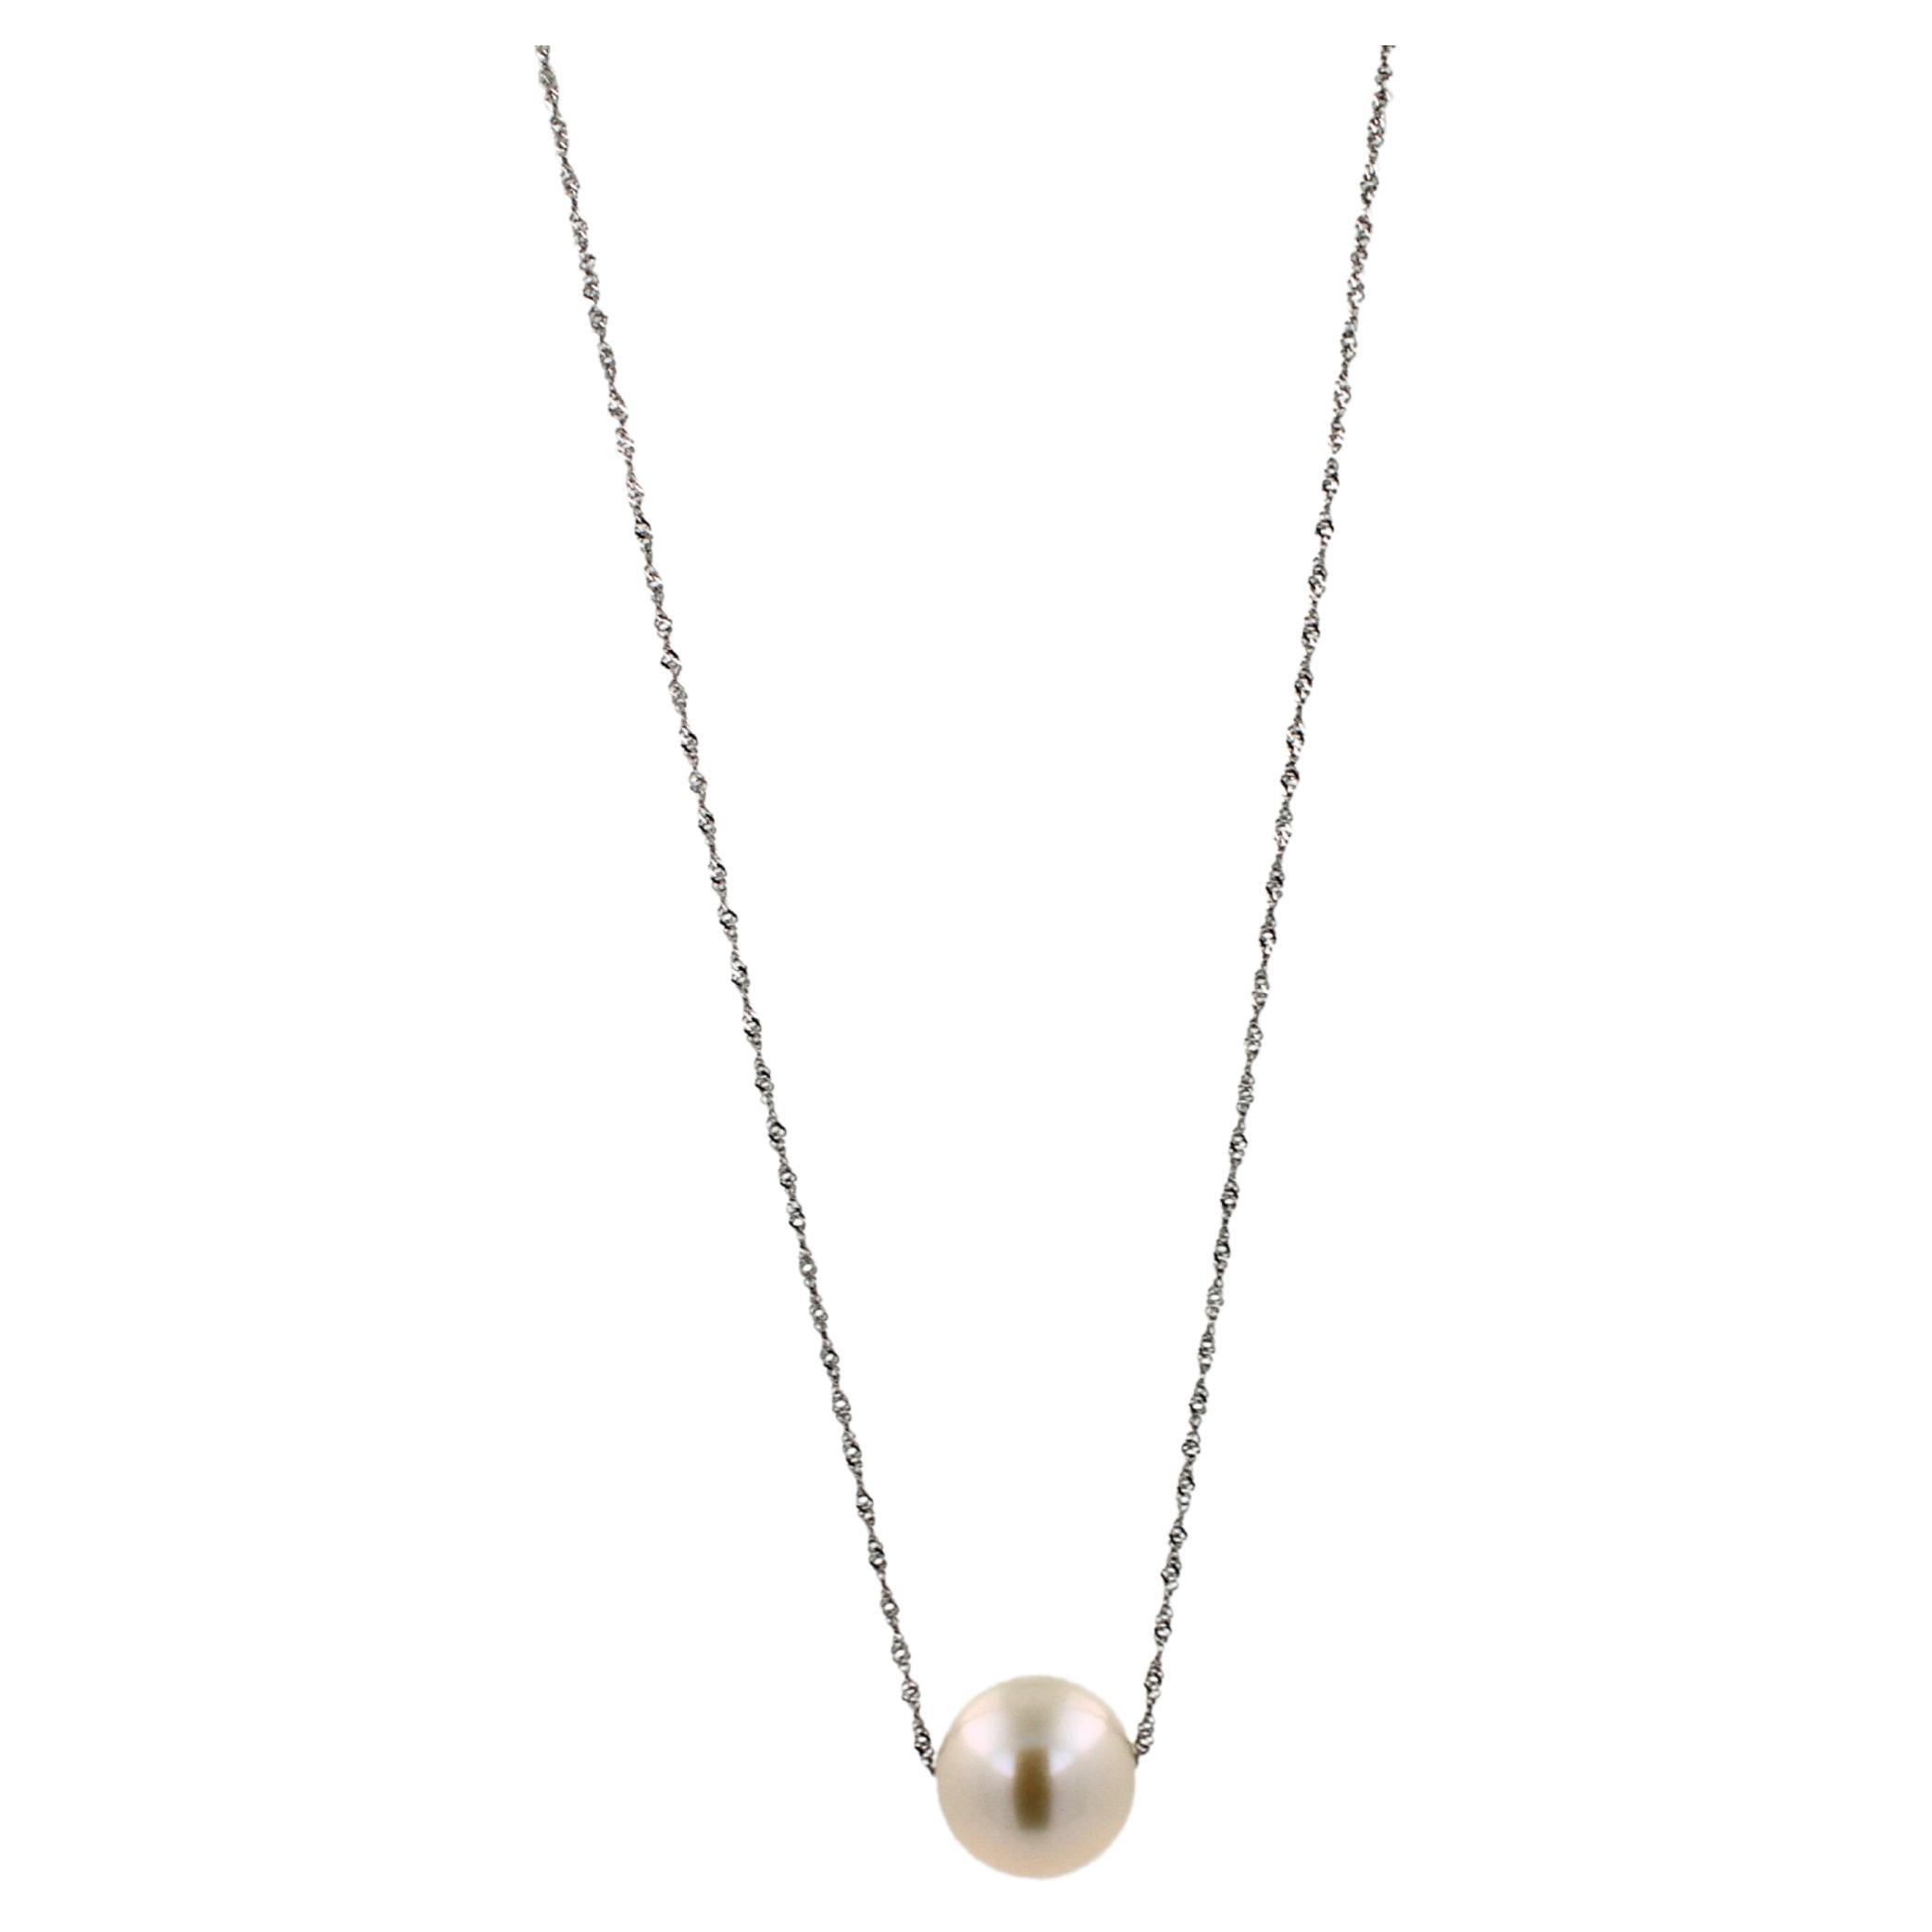 White Pearl 
14 Karat White Gold
Adjustable Length High-Finish Chain
High Quality Pearl with Beautiful Shine, Luster, Size & Brilliance
Classic, Minimalistic Design 